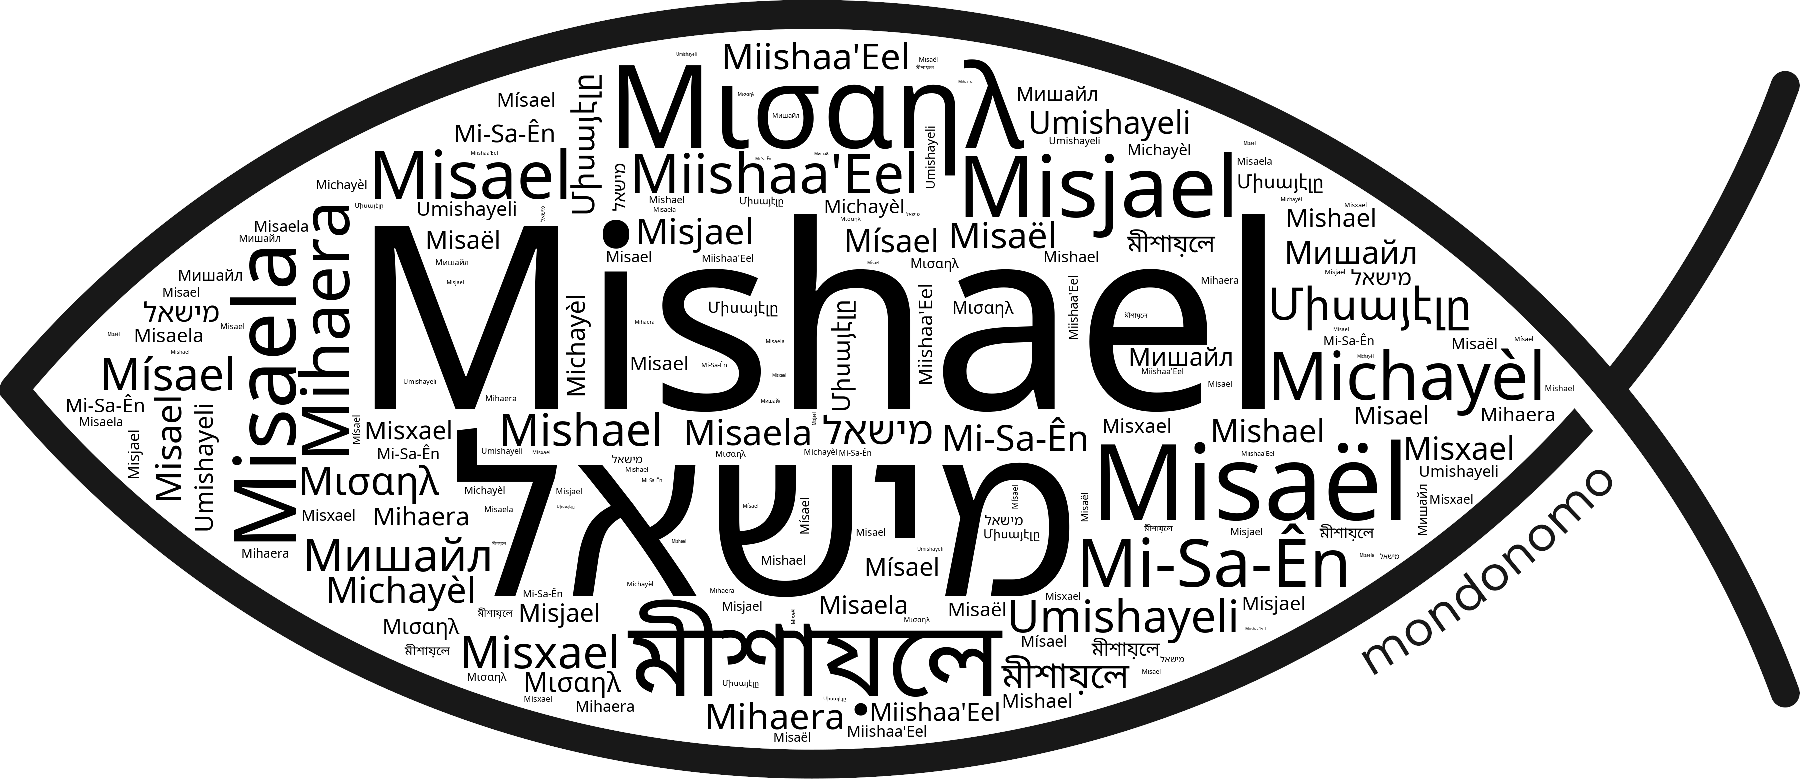 Name Mishael in the world's Bibles